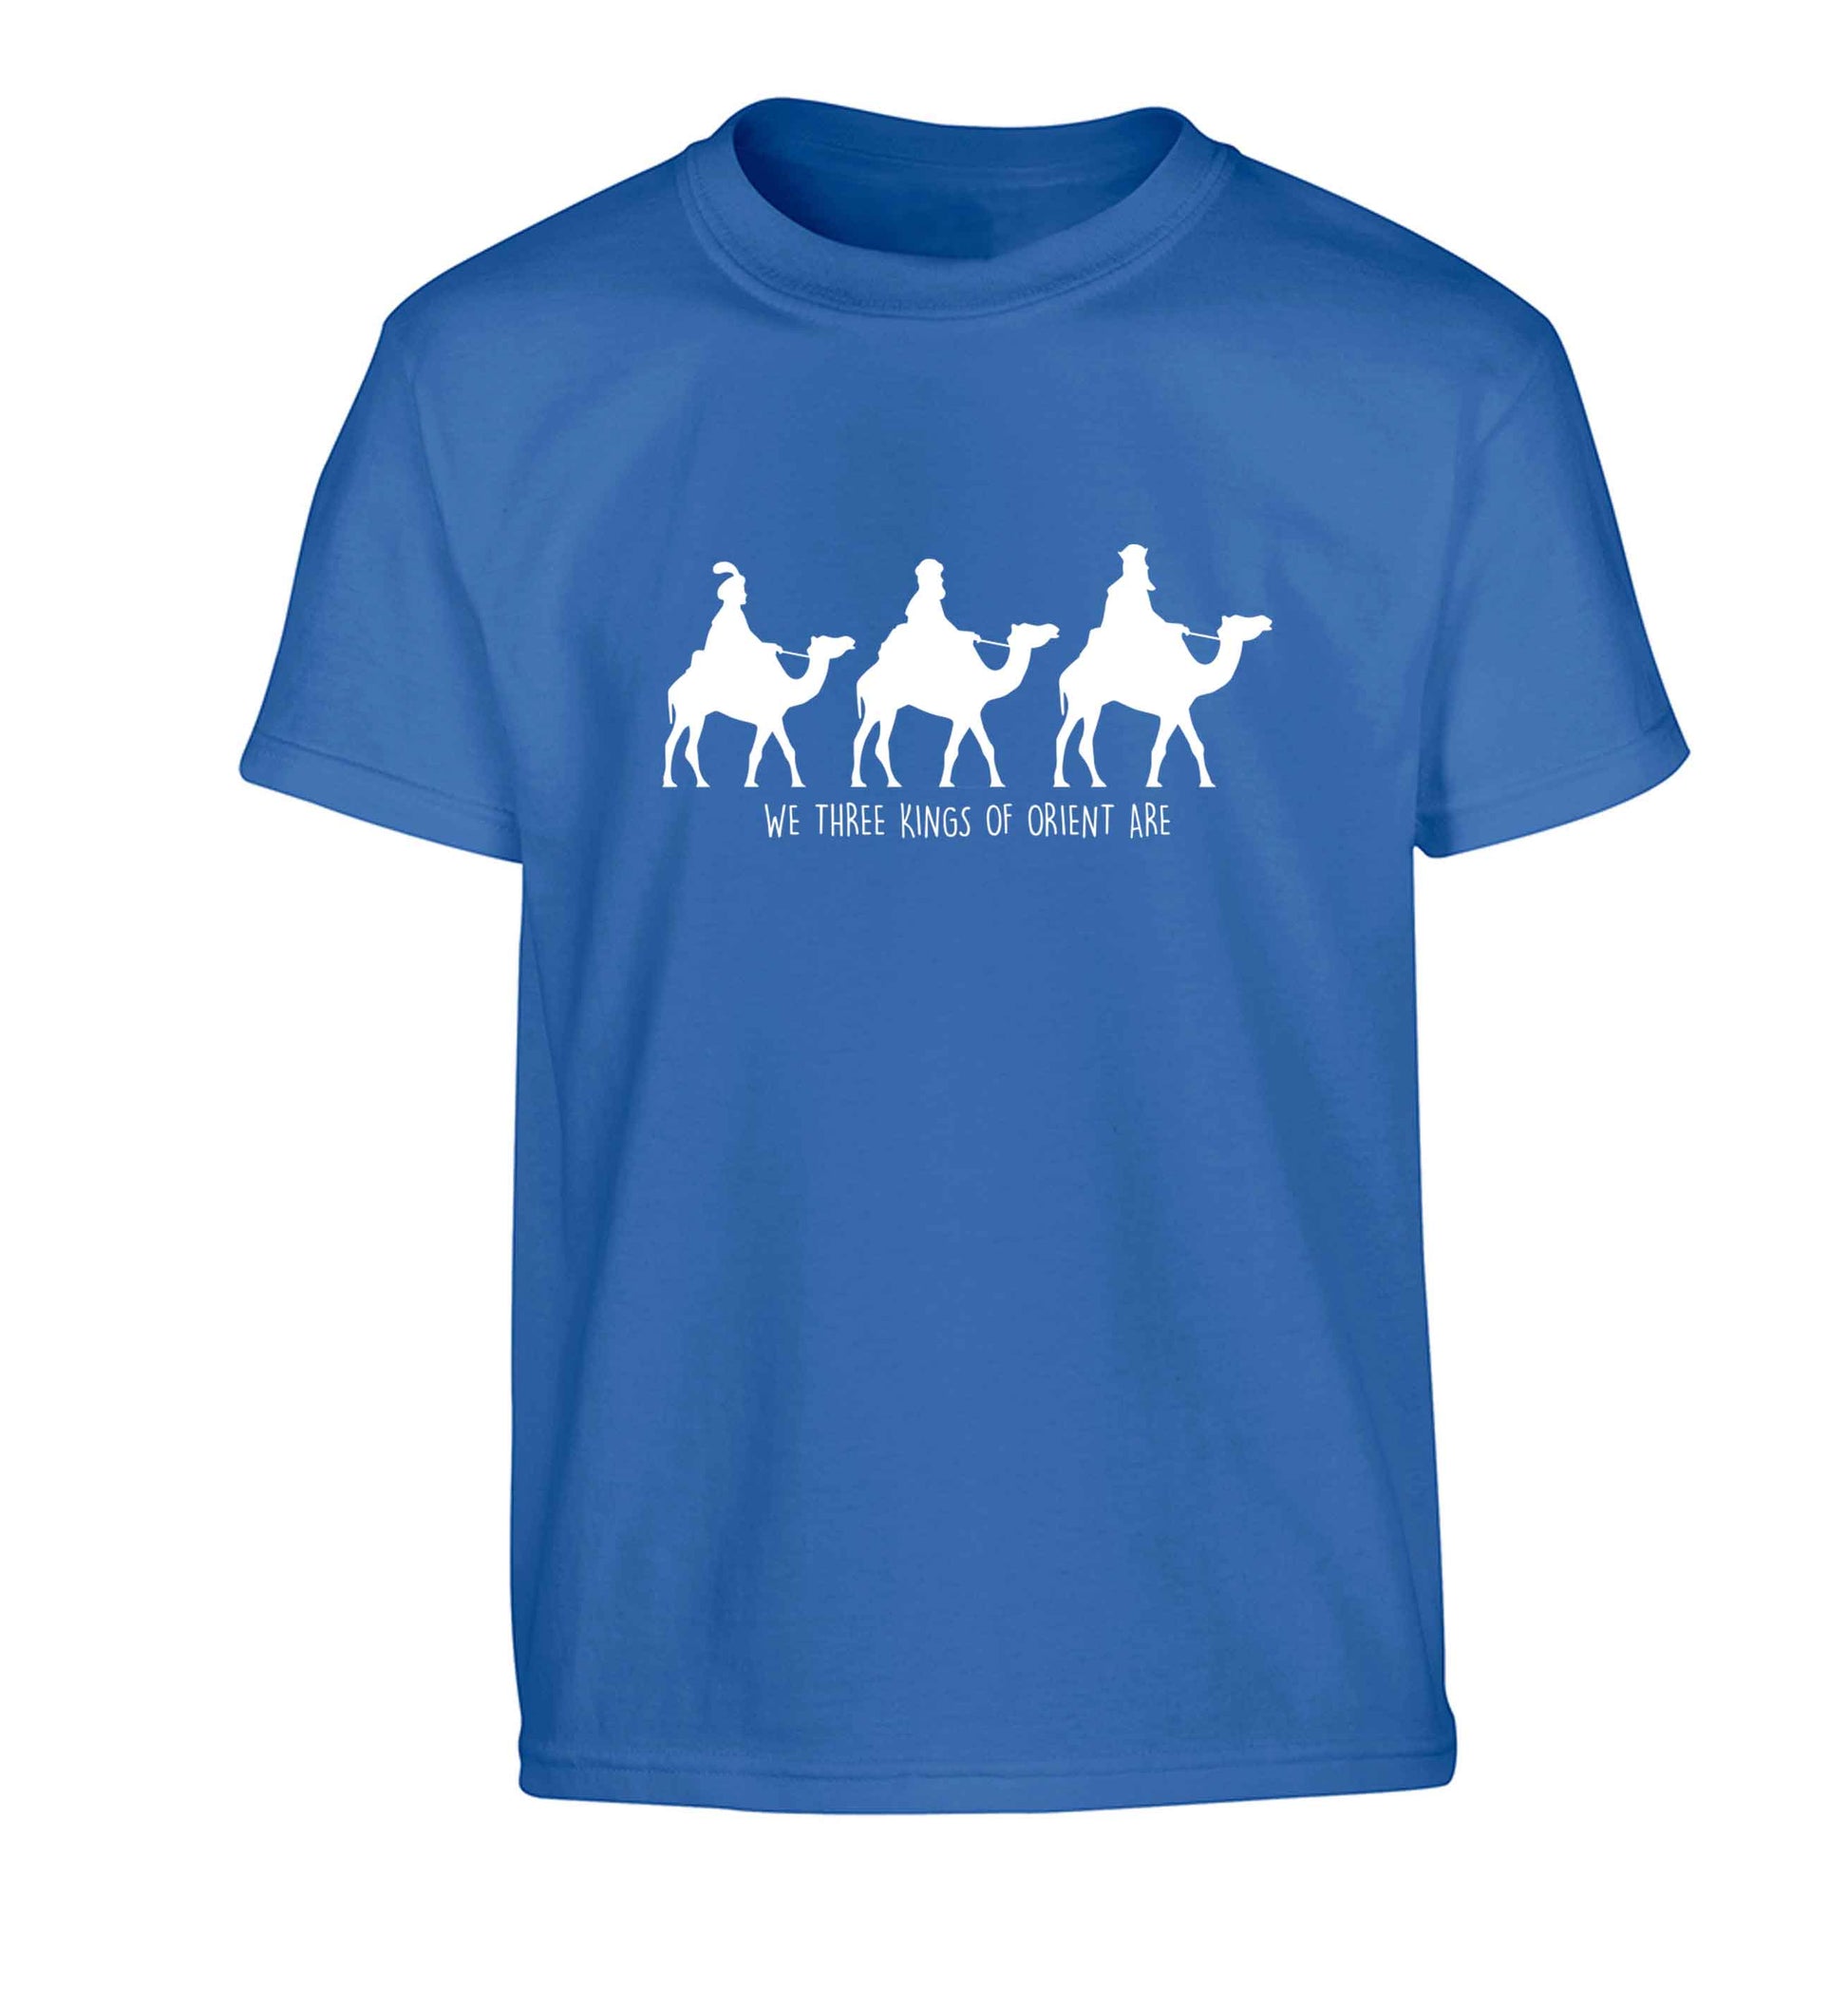 We three kings of orient are Children's blue Tshirt 12-13 Years